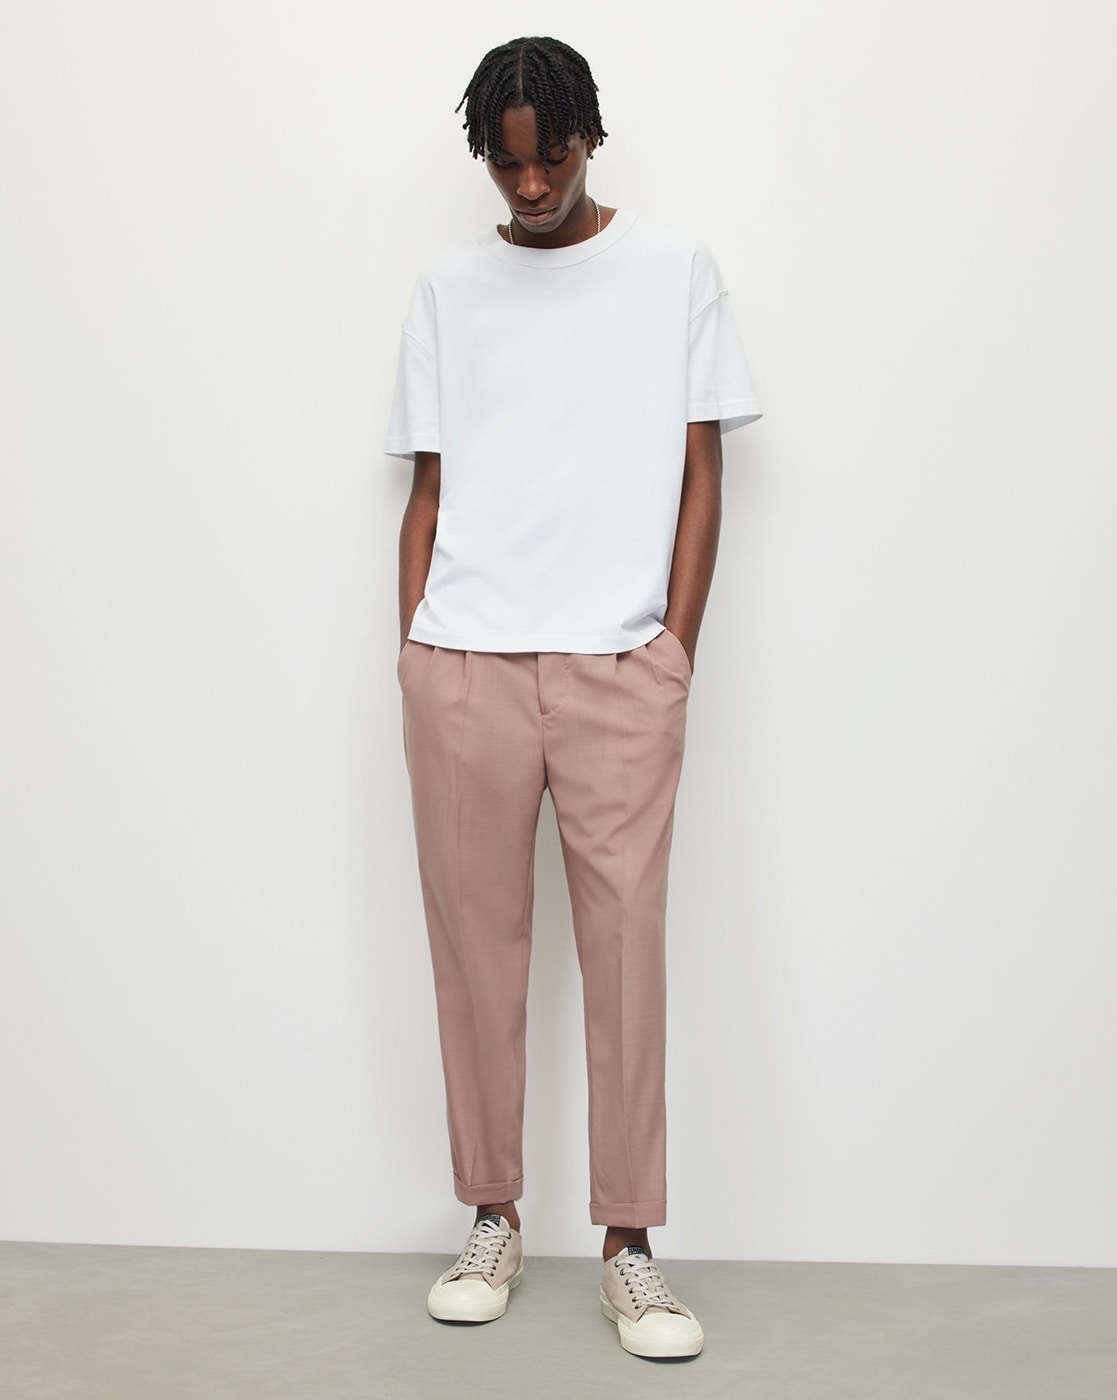 Stylish Designs of Pink Trousers for Men and Women in Fashion | Decor | Pink  trousers, Light pink pants, Beach wear outfits